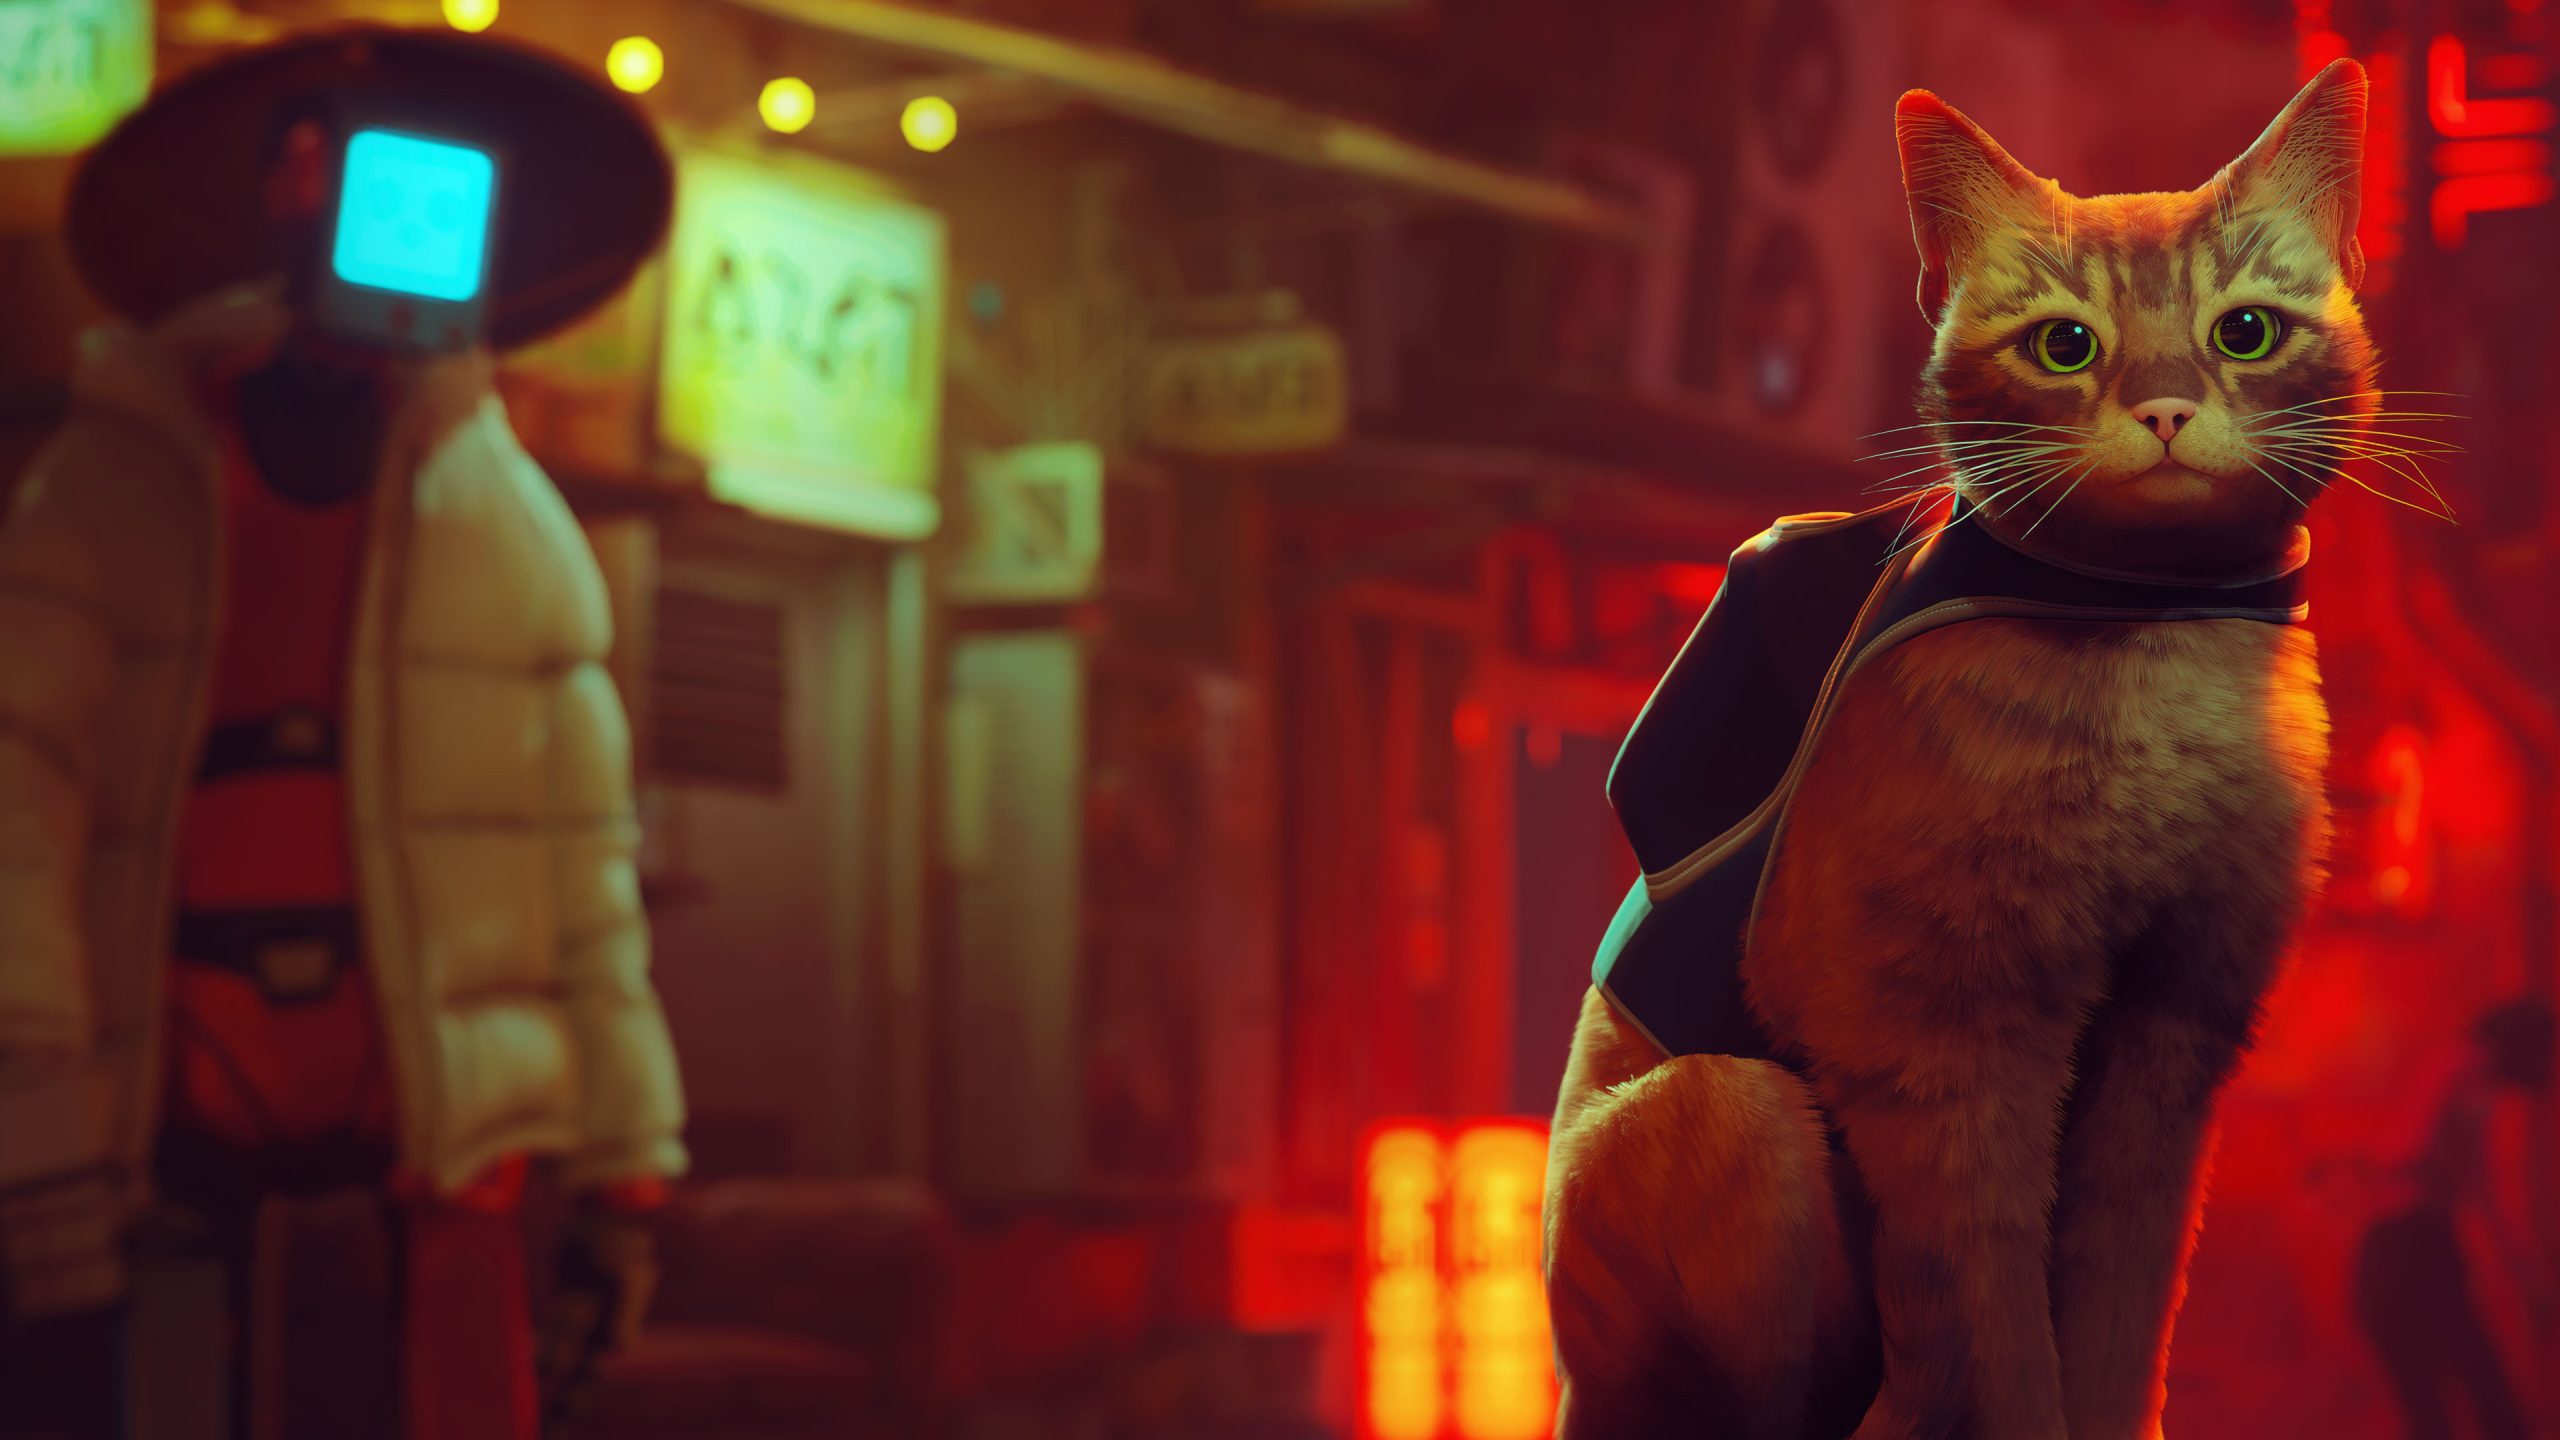 Digital artwork for Stray game showing a ginger cat in a backpack and a robot in the background.